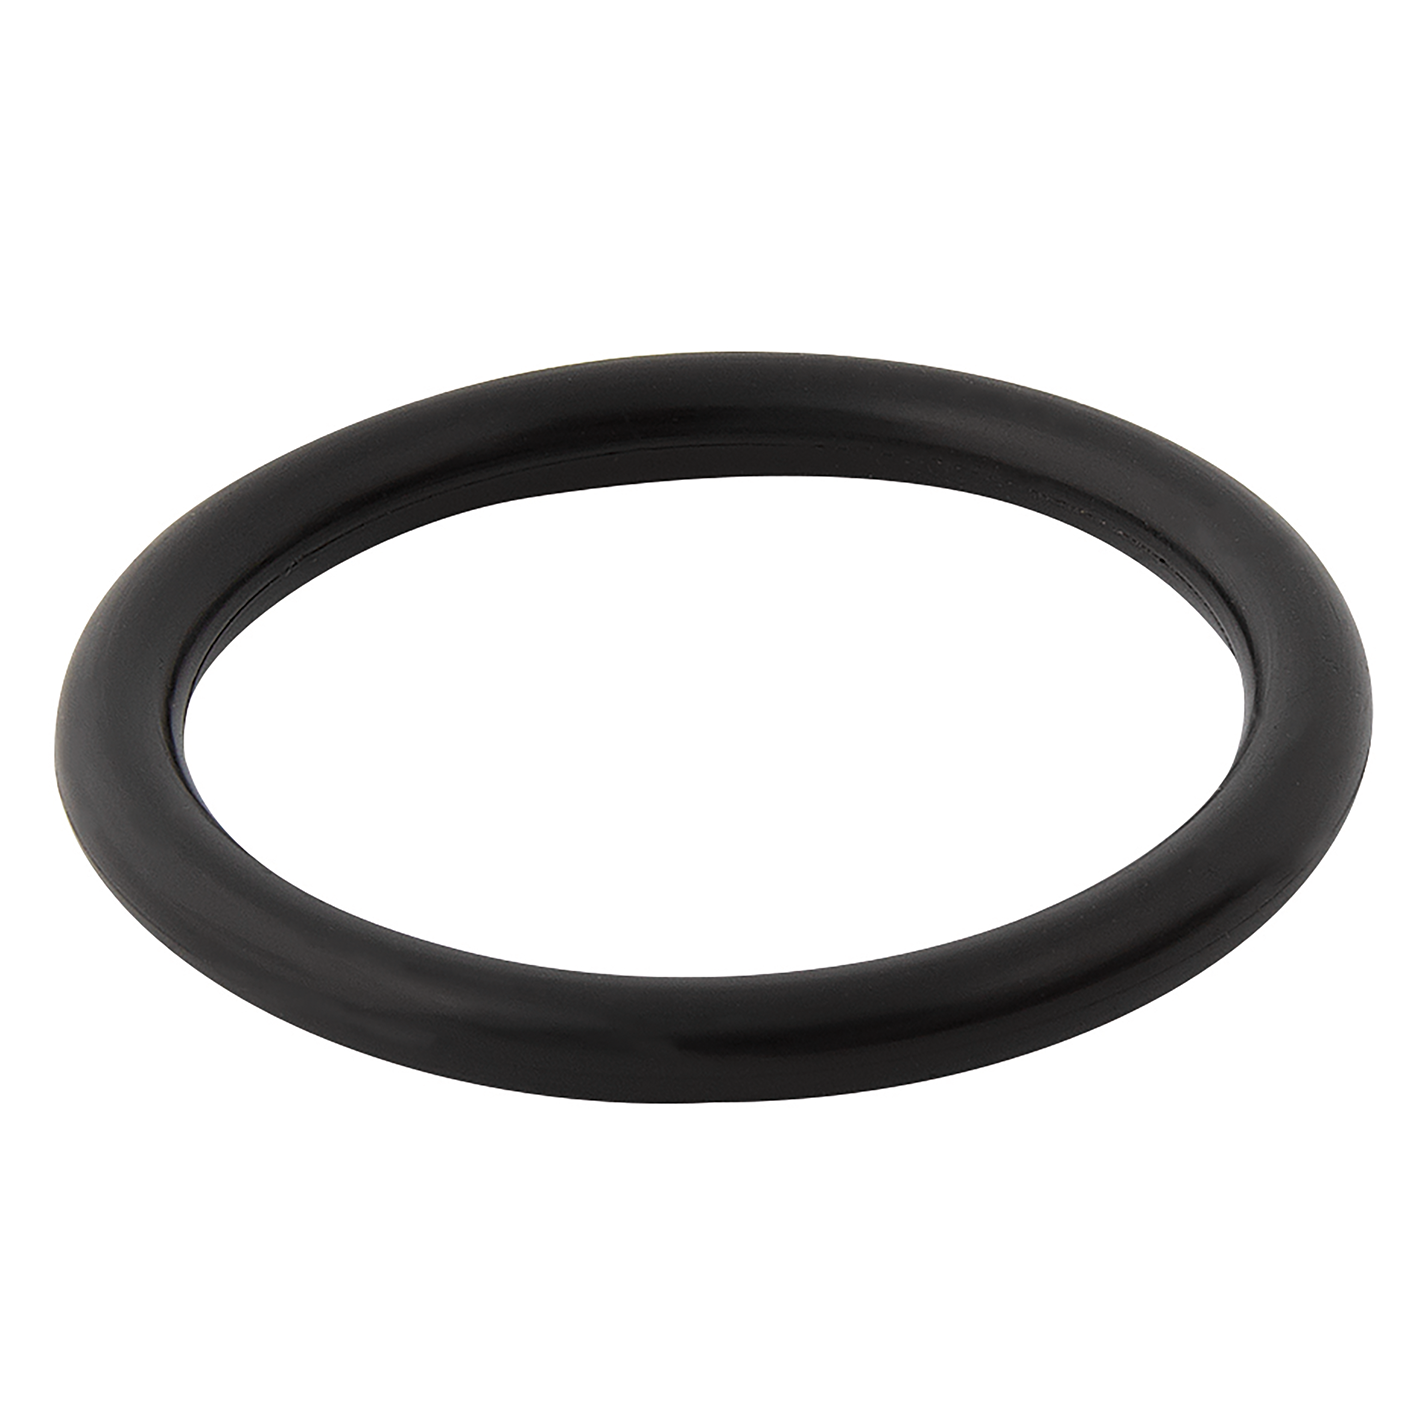 2.1/2" RJT Nitrile Joint Ring